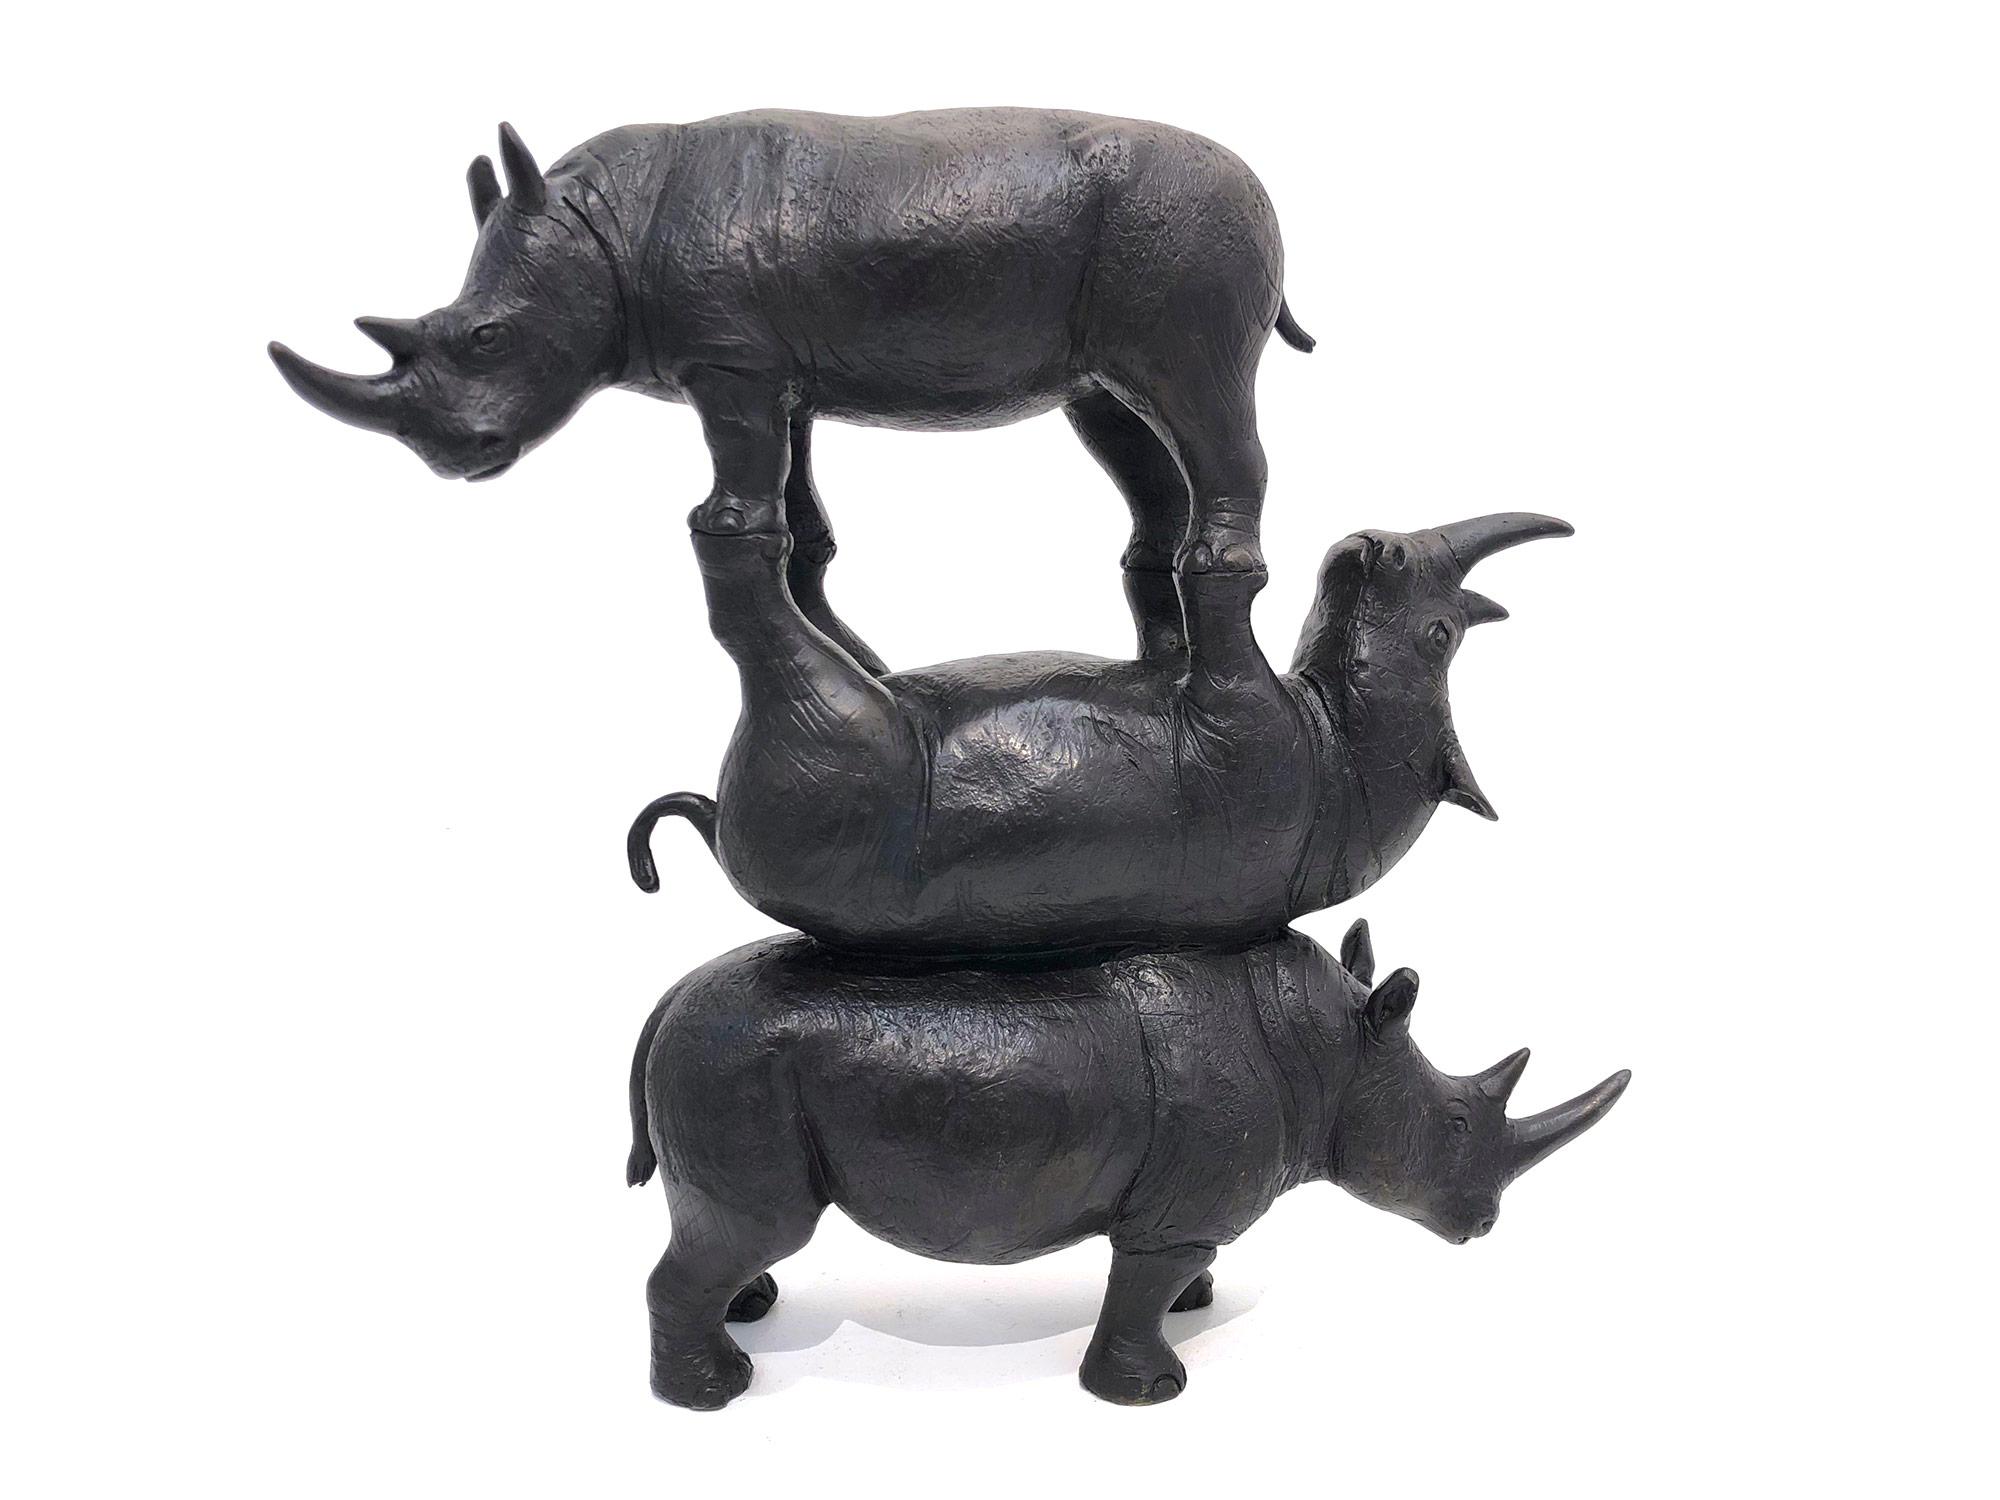 Gillie and Marc Schattner Figurative Sculpture - "The Last Three on Earth" Rhinoceros Bronze Sculpture with Deep Bronze Patina